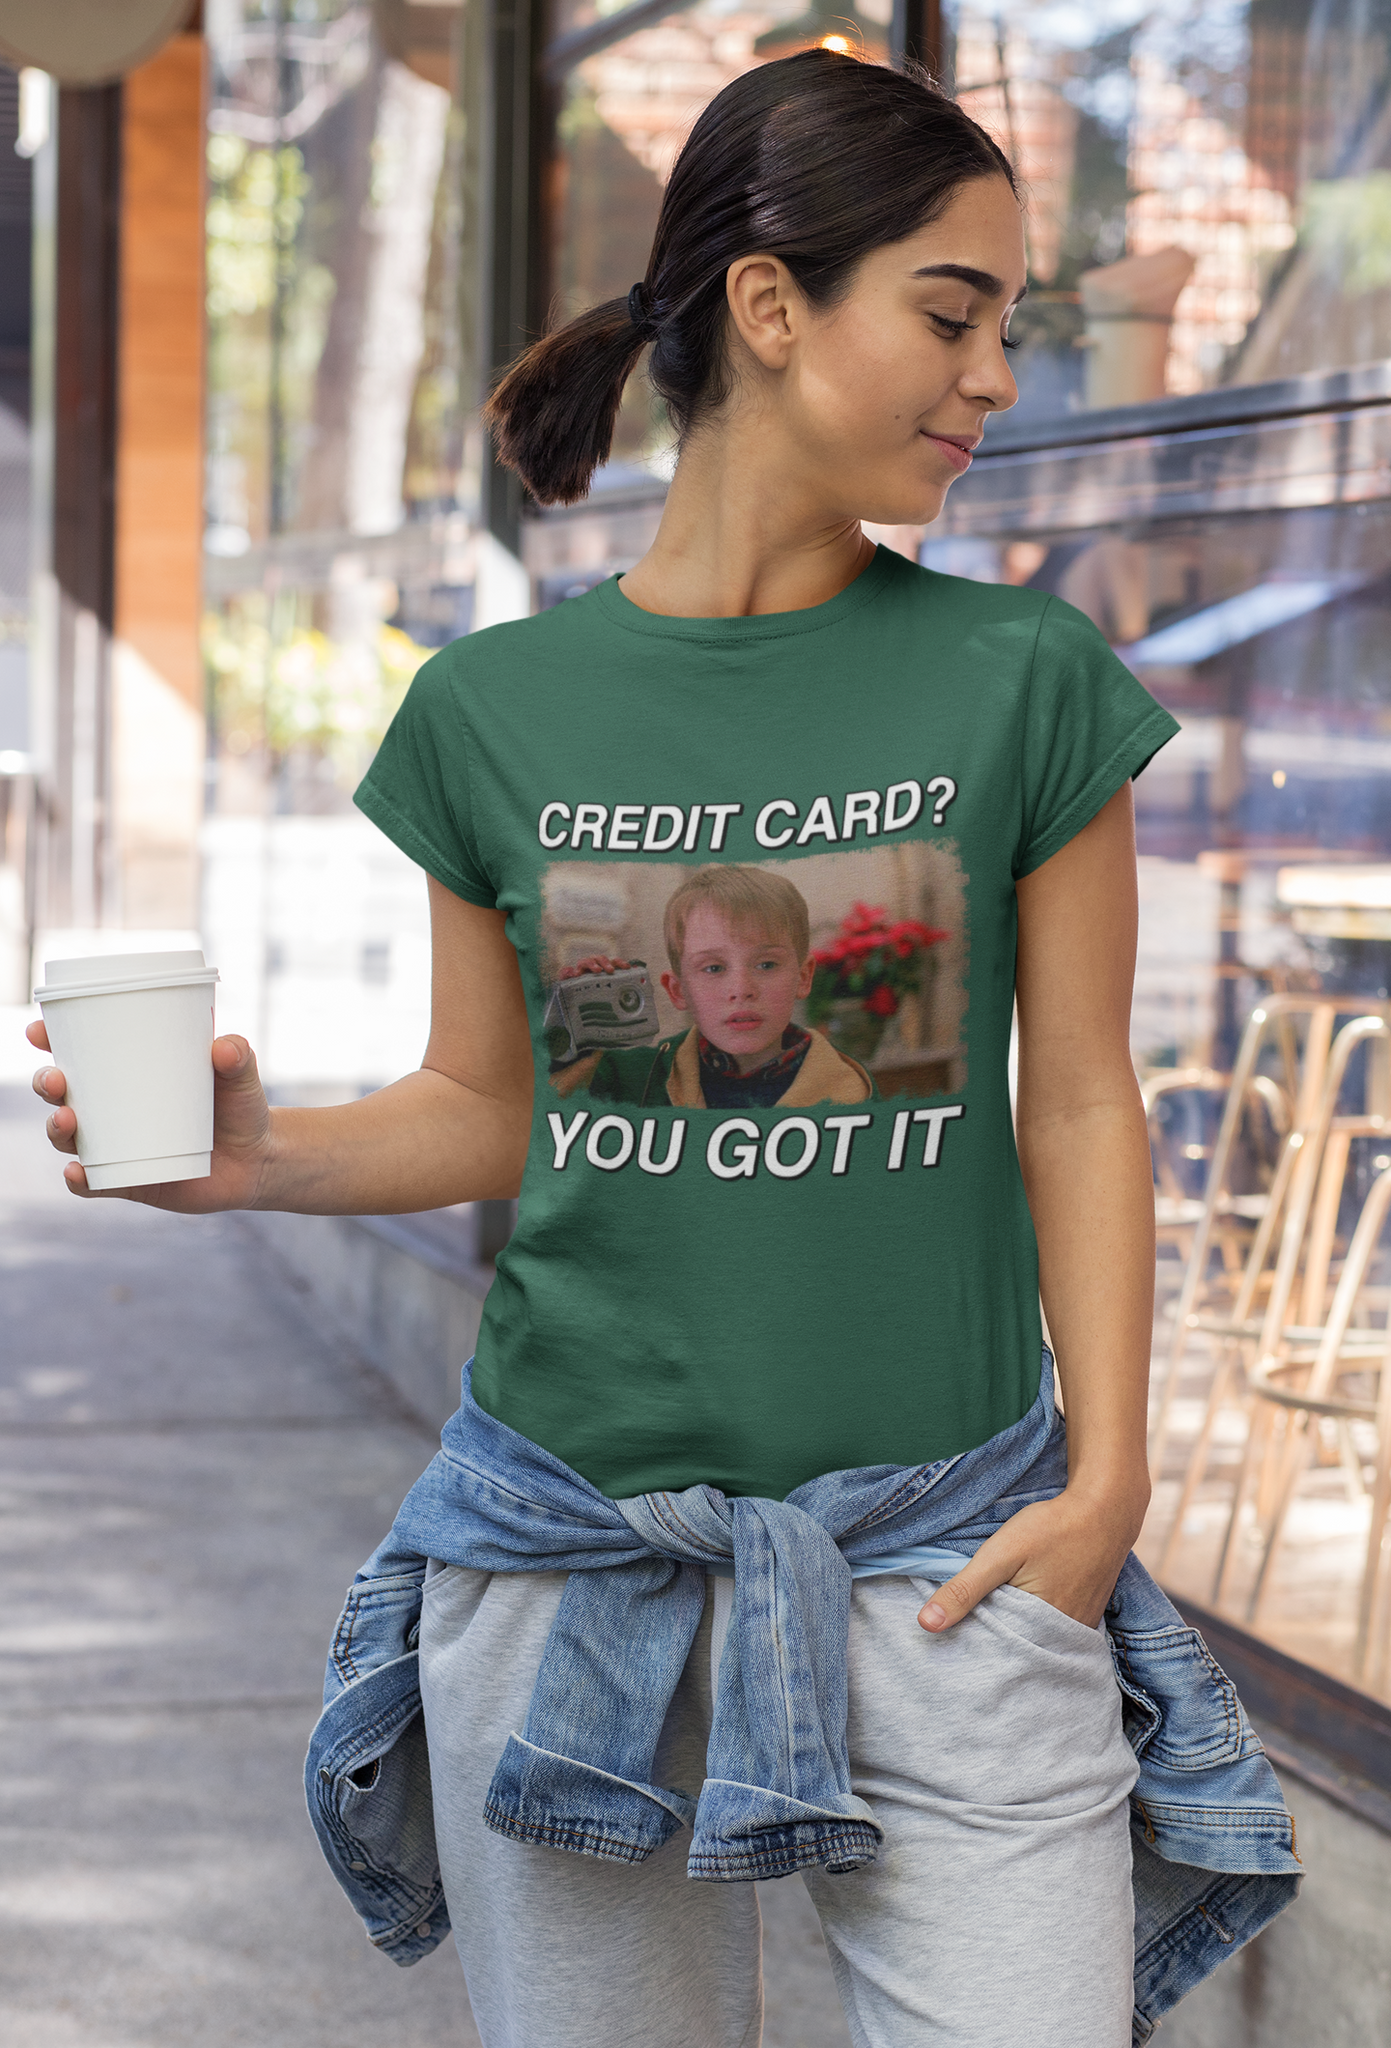 Home Alone T Shirt, Credit Card You Got It Tshirt, Kevin McCallister T Shirt, Christmas Gifts